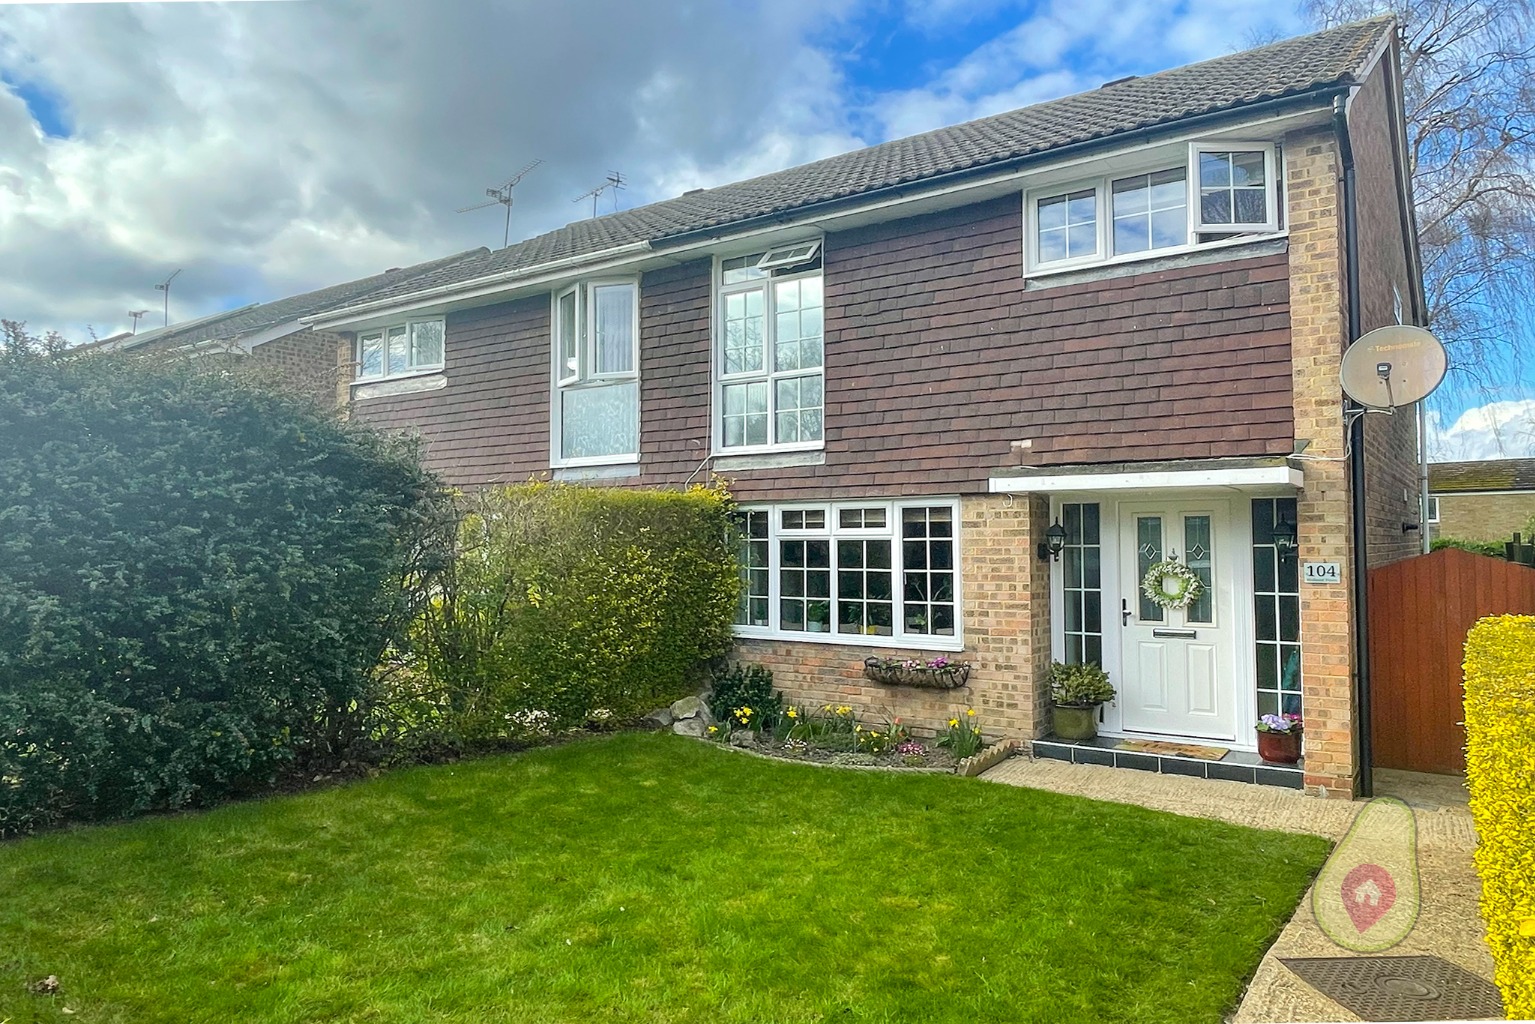 Set in a beautiful quiet location is this three bedroom semi-detached home presented in immaculate condition. There is potential to extend the property (stpp) to the front and rear, or is ready to move into for someone looking for a spacious home in a very quiet no-through-road location.